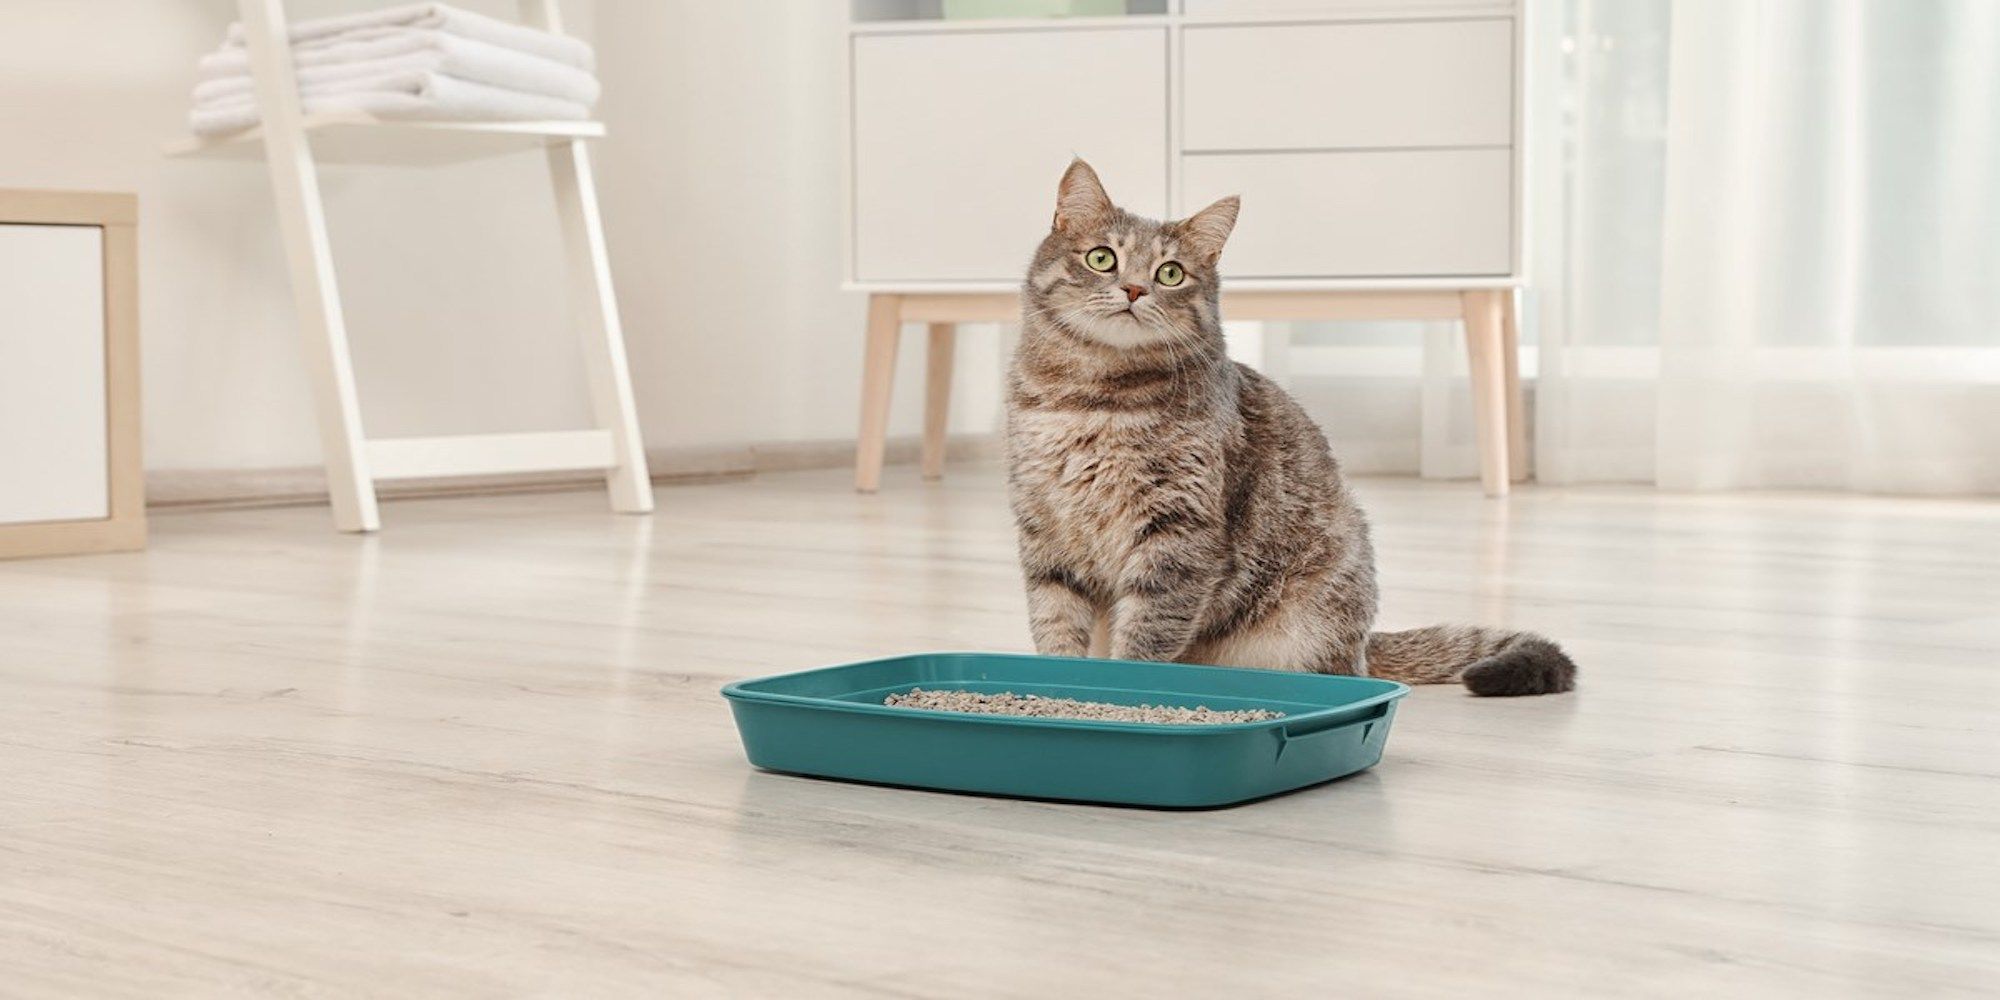 Cat Litter How to Choose the Safest Type for Your Pet